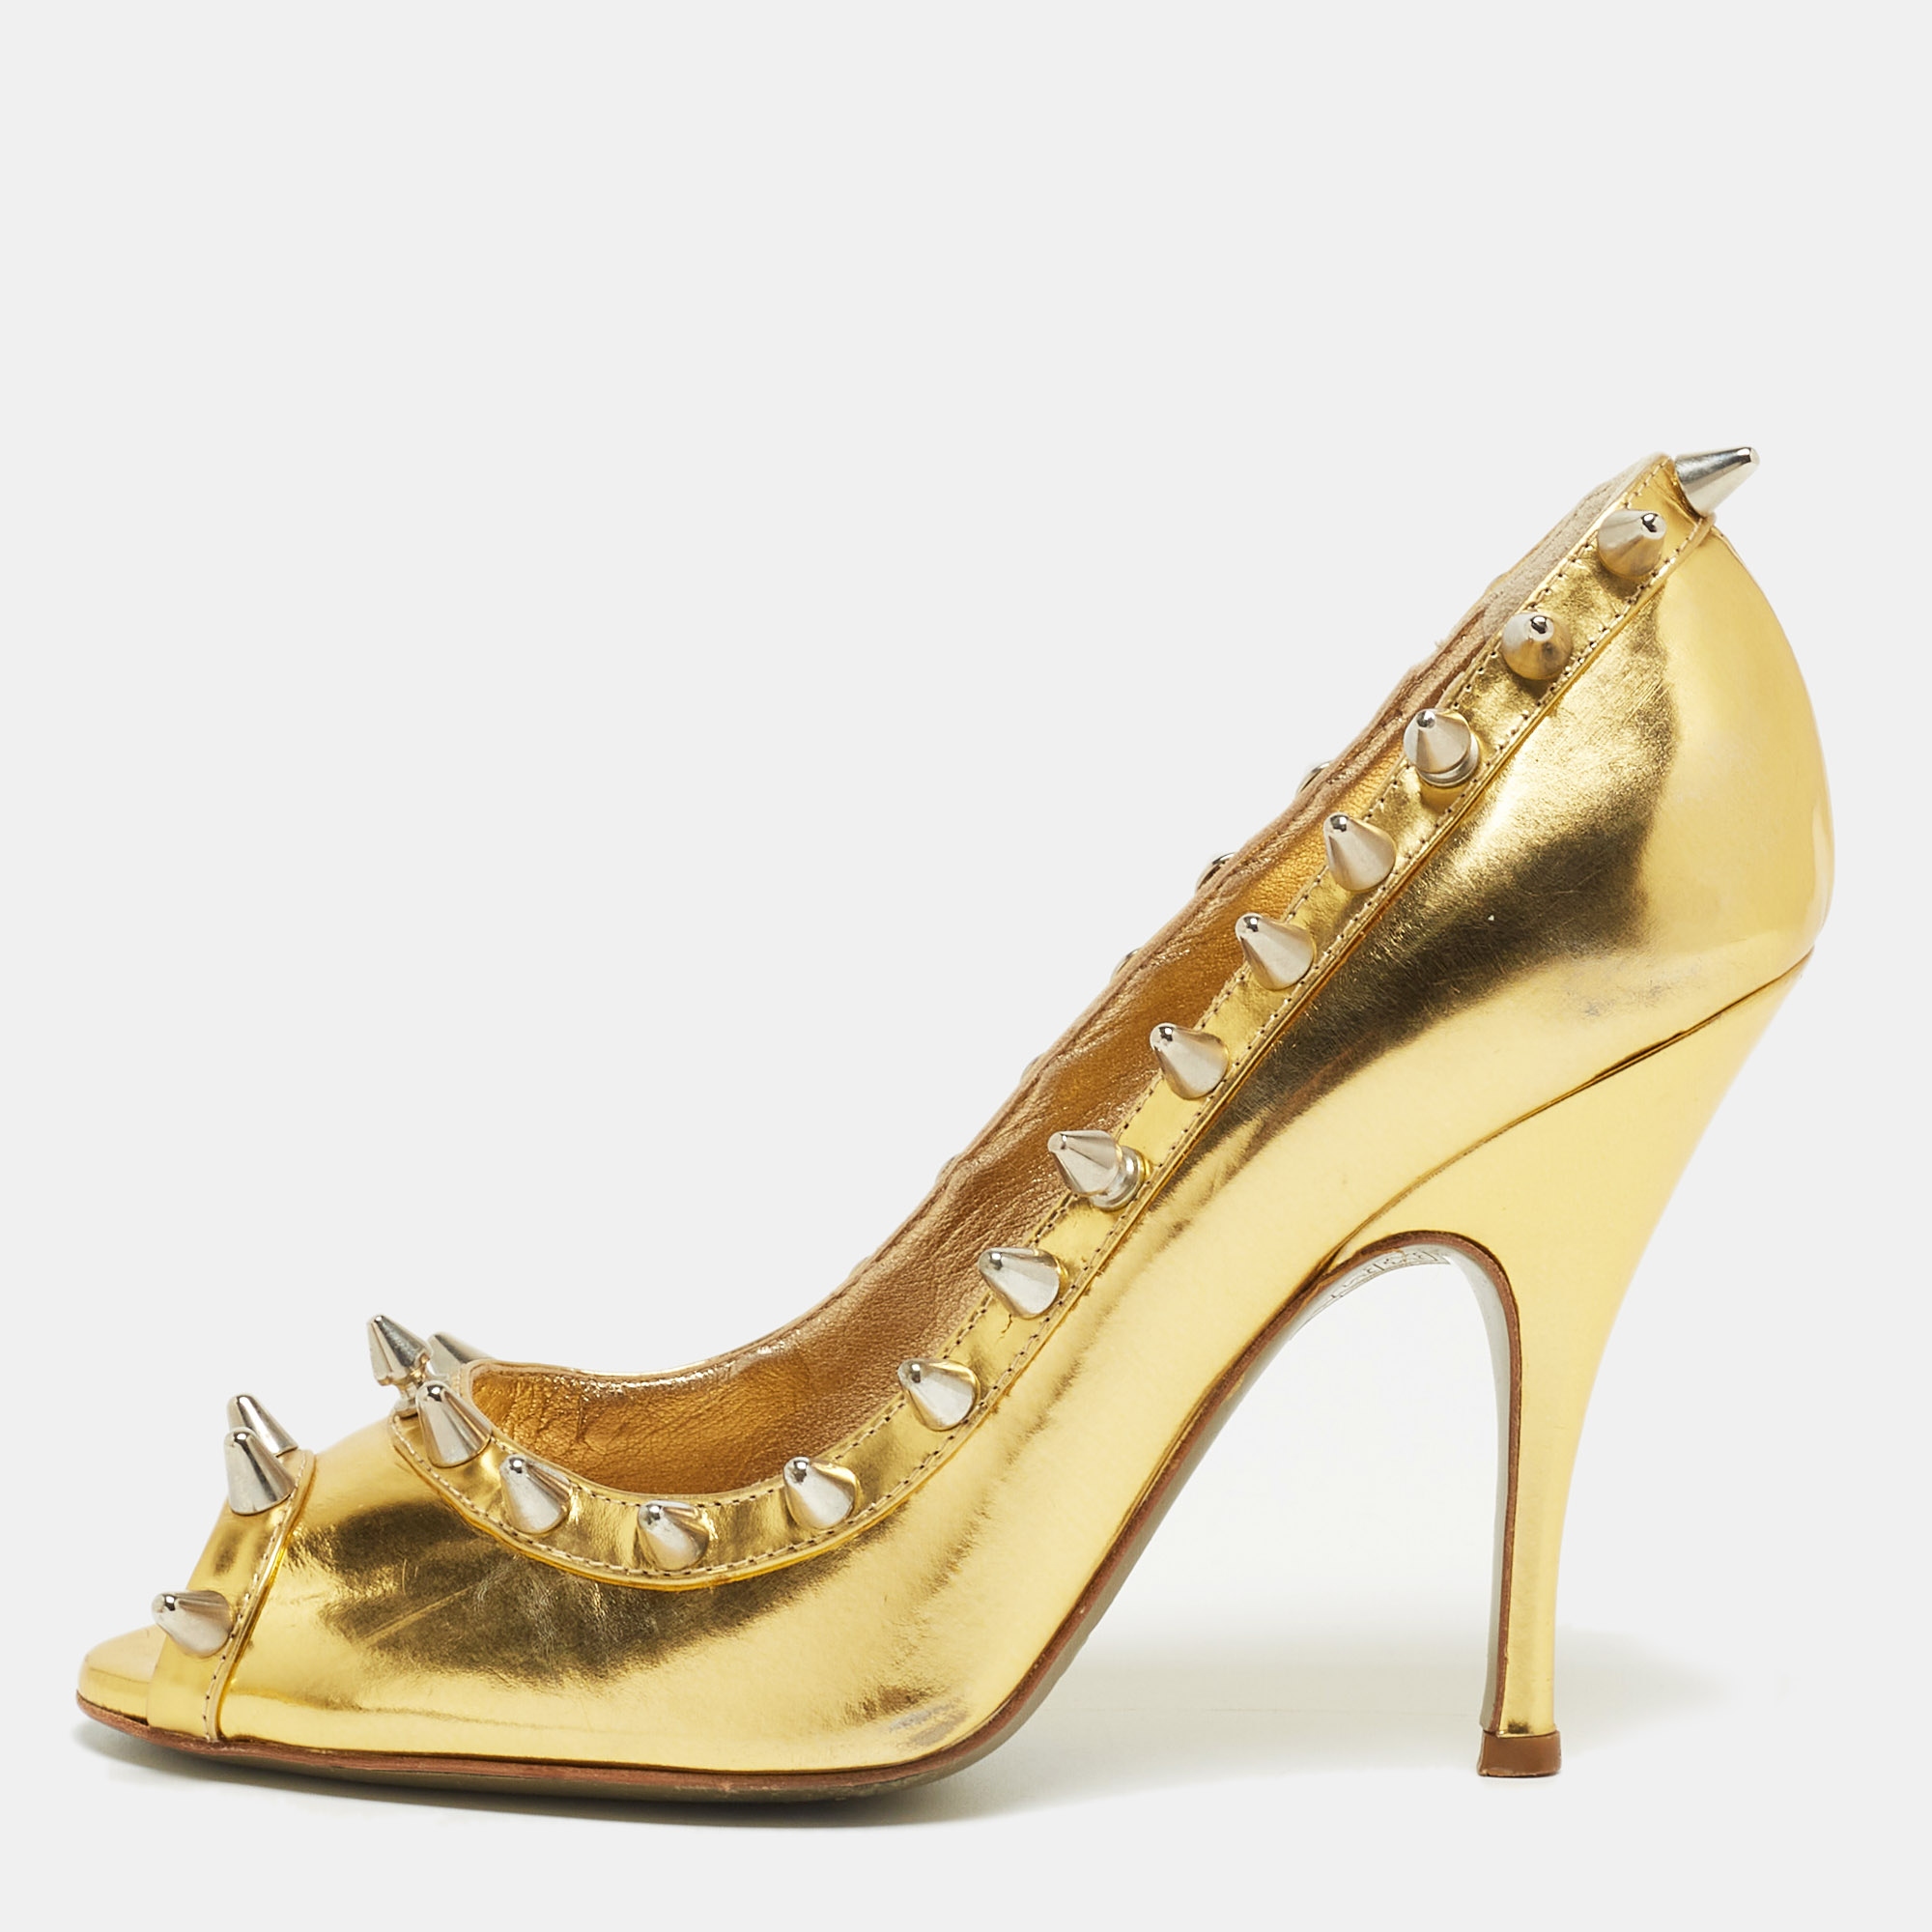 Pre-owned Dolce & Gabbana Gold Leather Studded Open Toe Pumps Size 38